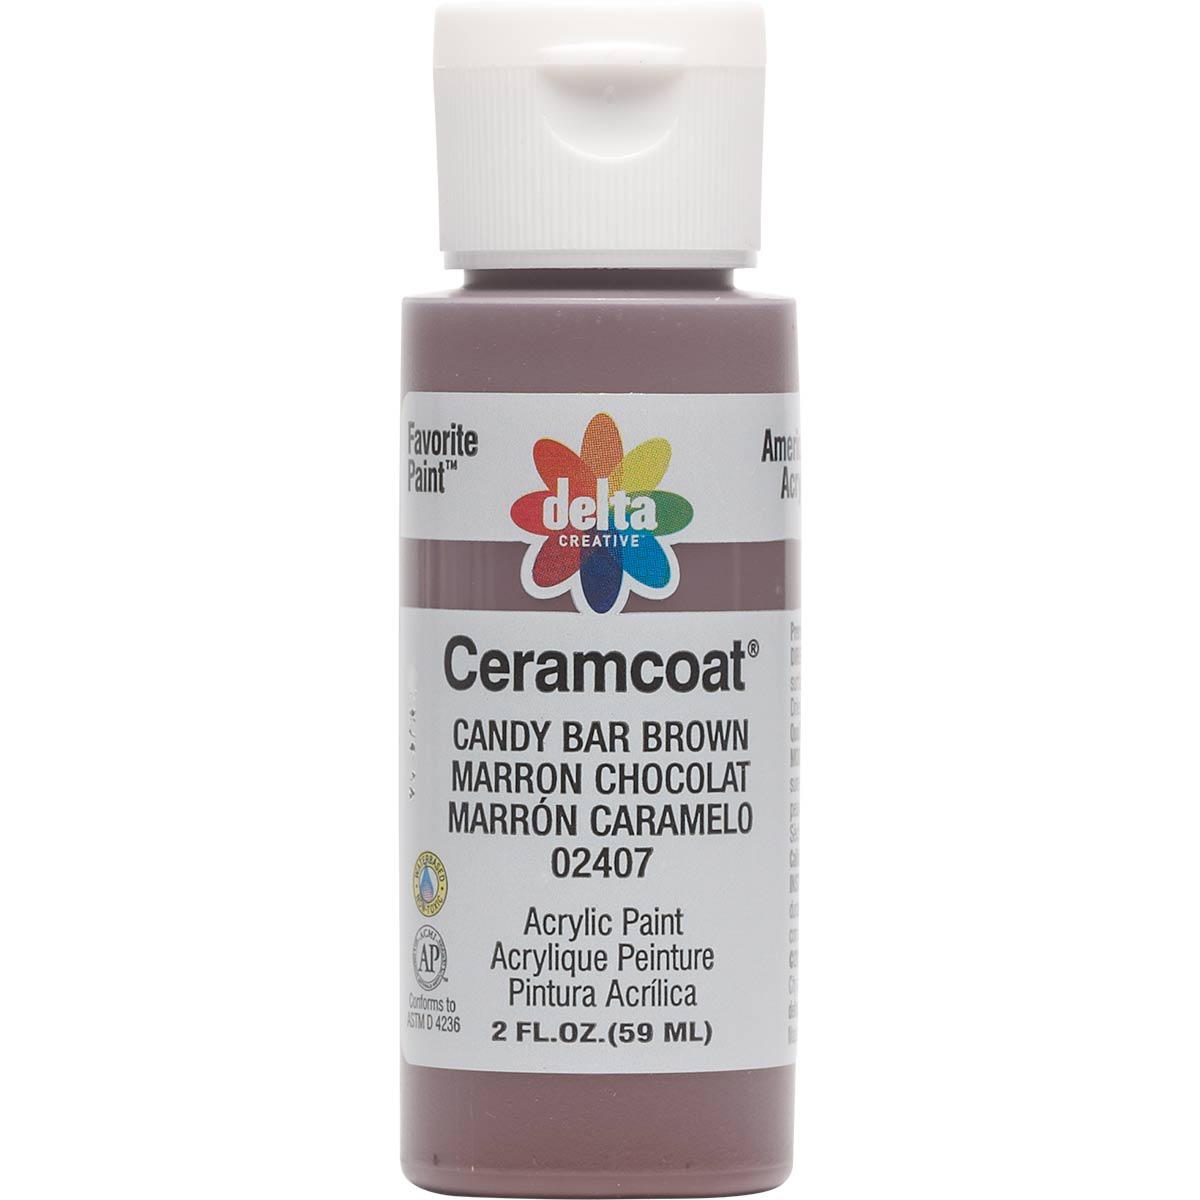 Delta Ceramcoat Acrylic Paint - Candy Bar Brown, 2 oz. - 024070202W